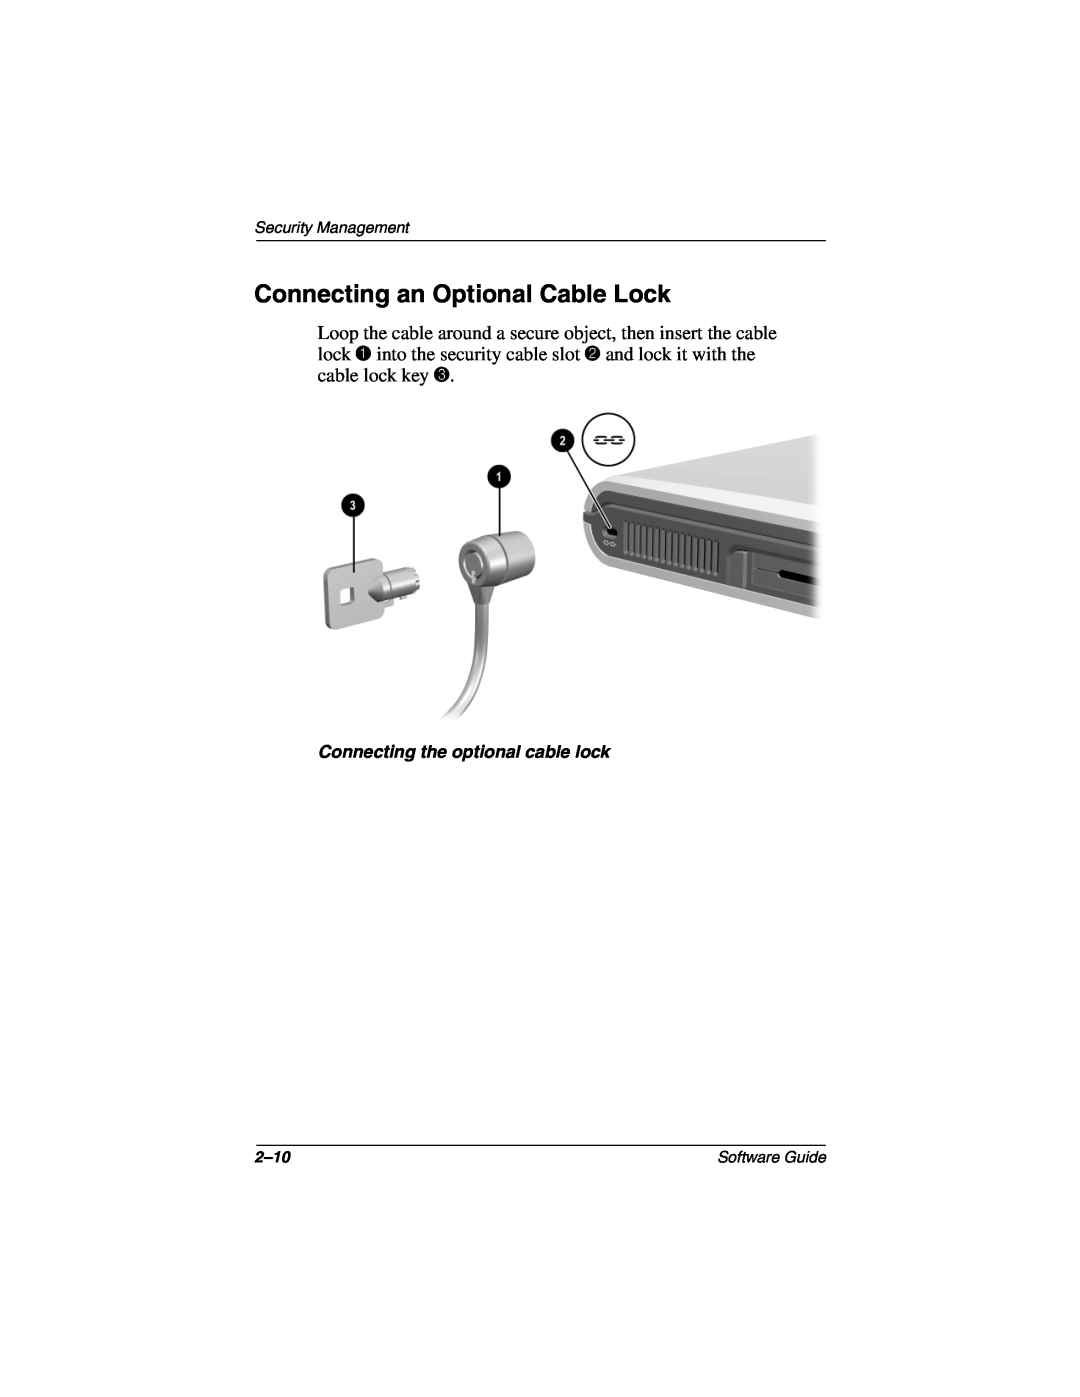 HP 907AP Connecting an Optional Cable Lock, Connecting the optional cable lock, Security Management, 2-10, Software Guide 